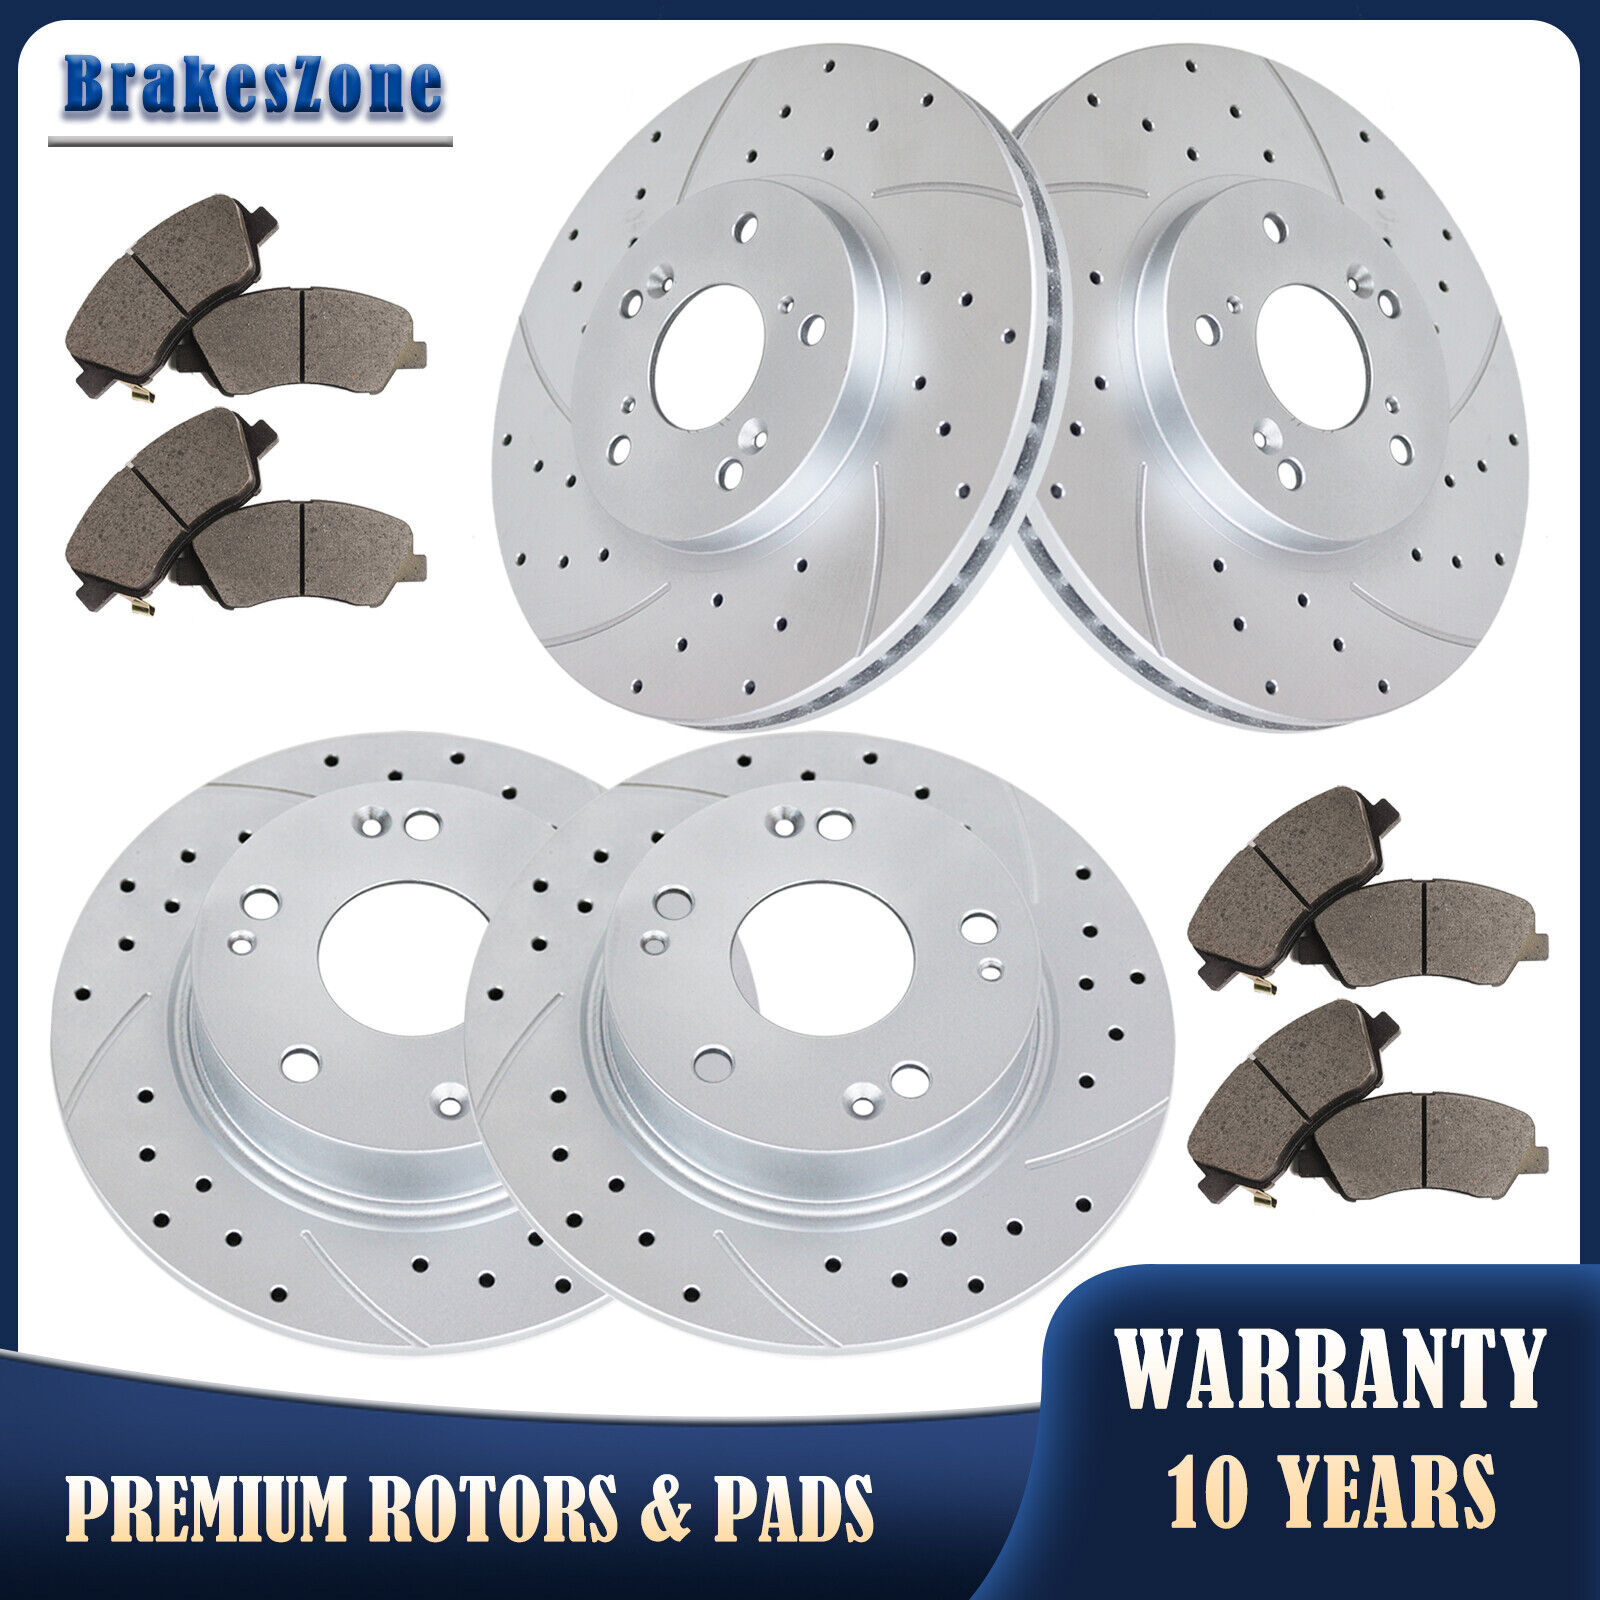 Fit for 2.4L Honda Accord 2003-2007 282mm Front & 260mm Rear Brake Rotors Pads